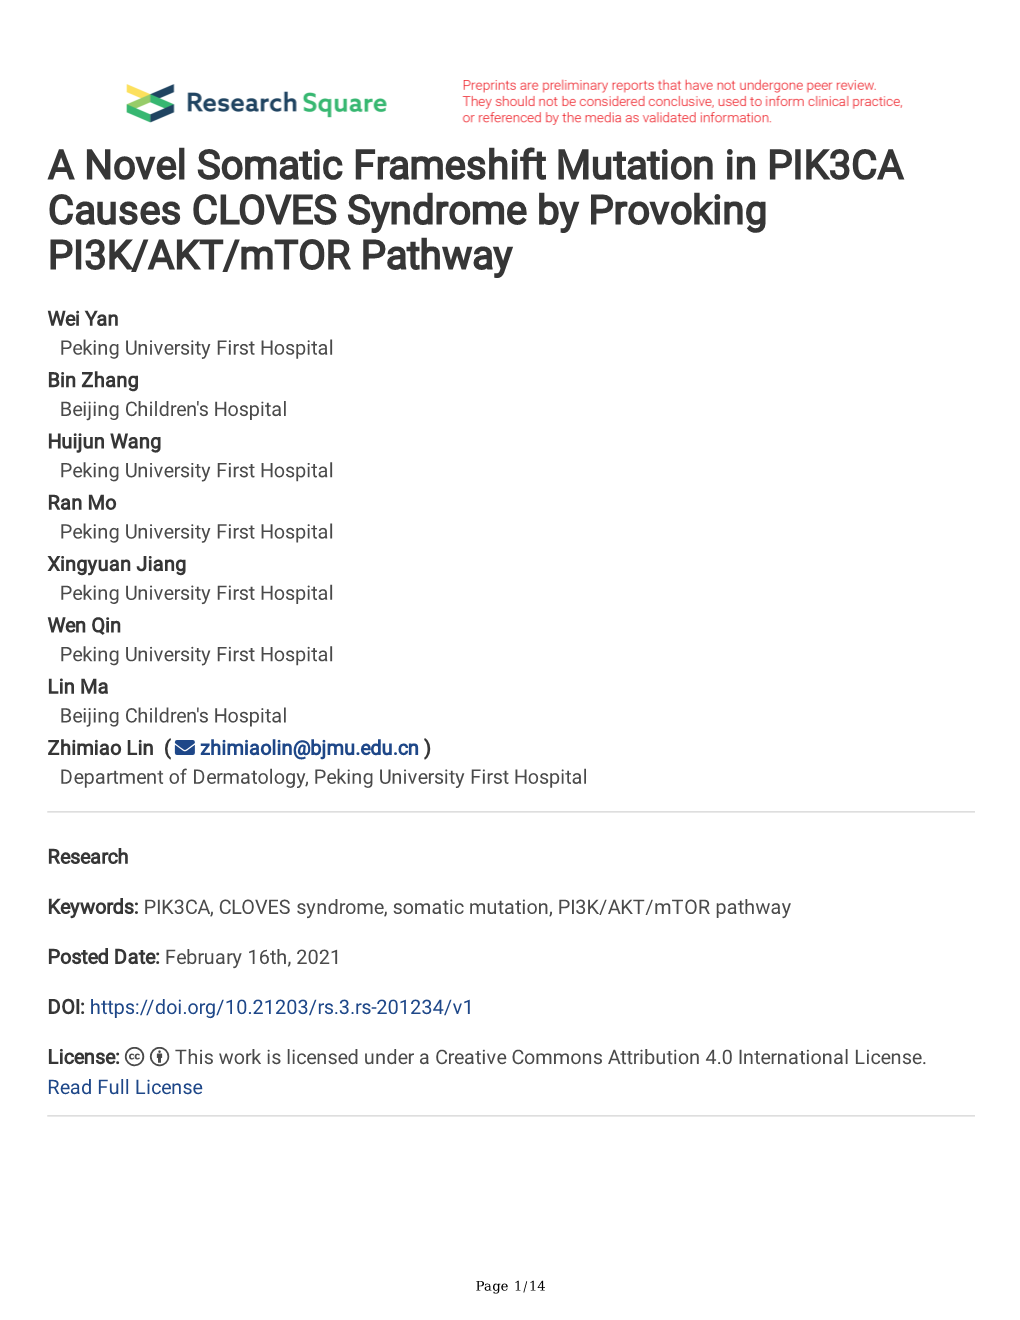 A Novel Somatic Frameshift Mutation in PIK3CA Causes CLOVES Syndrome by Provoking PI3K/AKT/Mtor Pathway